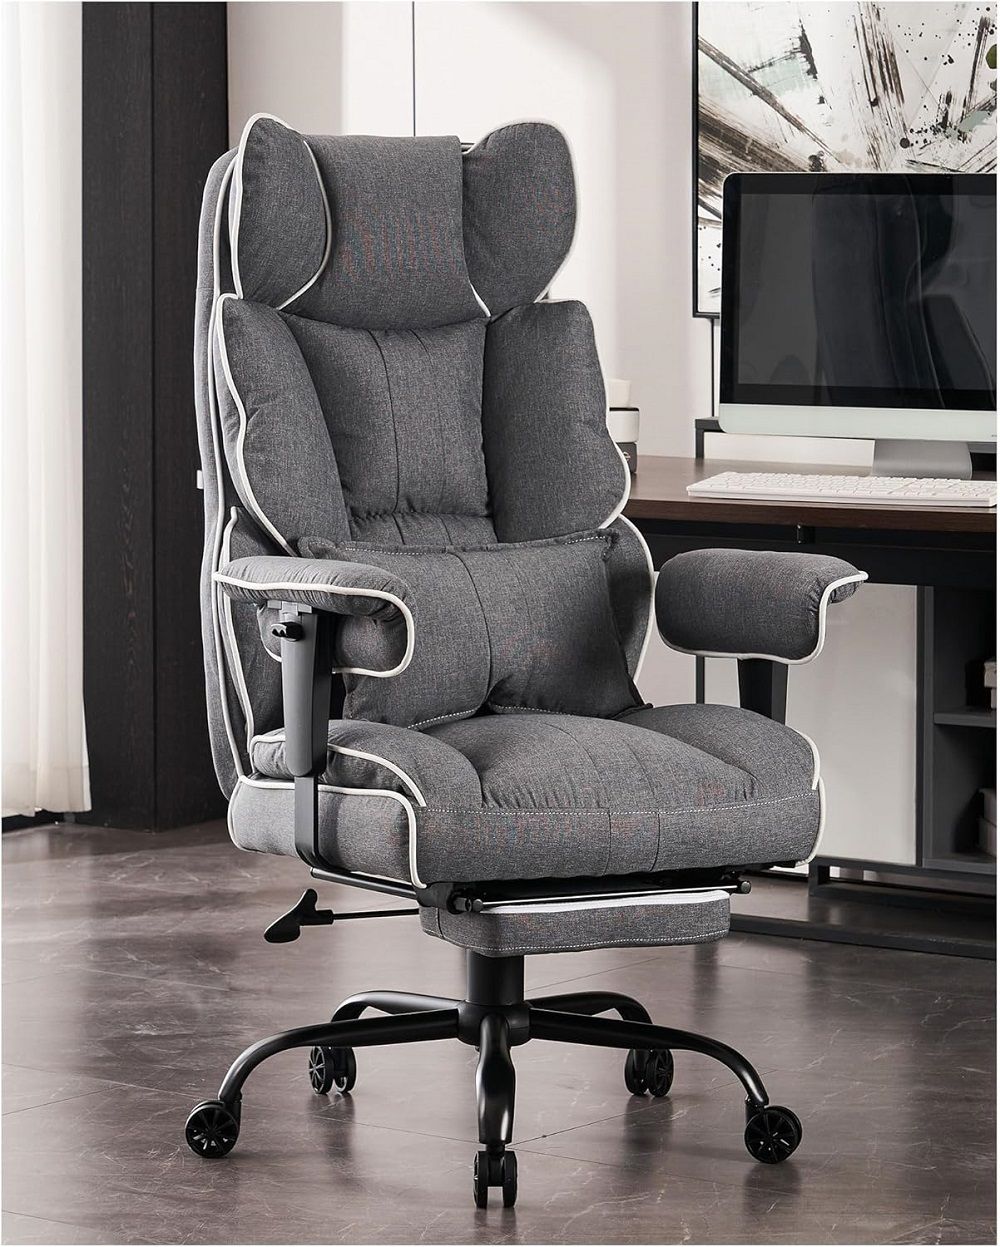 Efomao Adjustable Office Chair